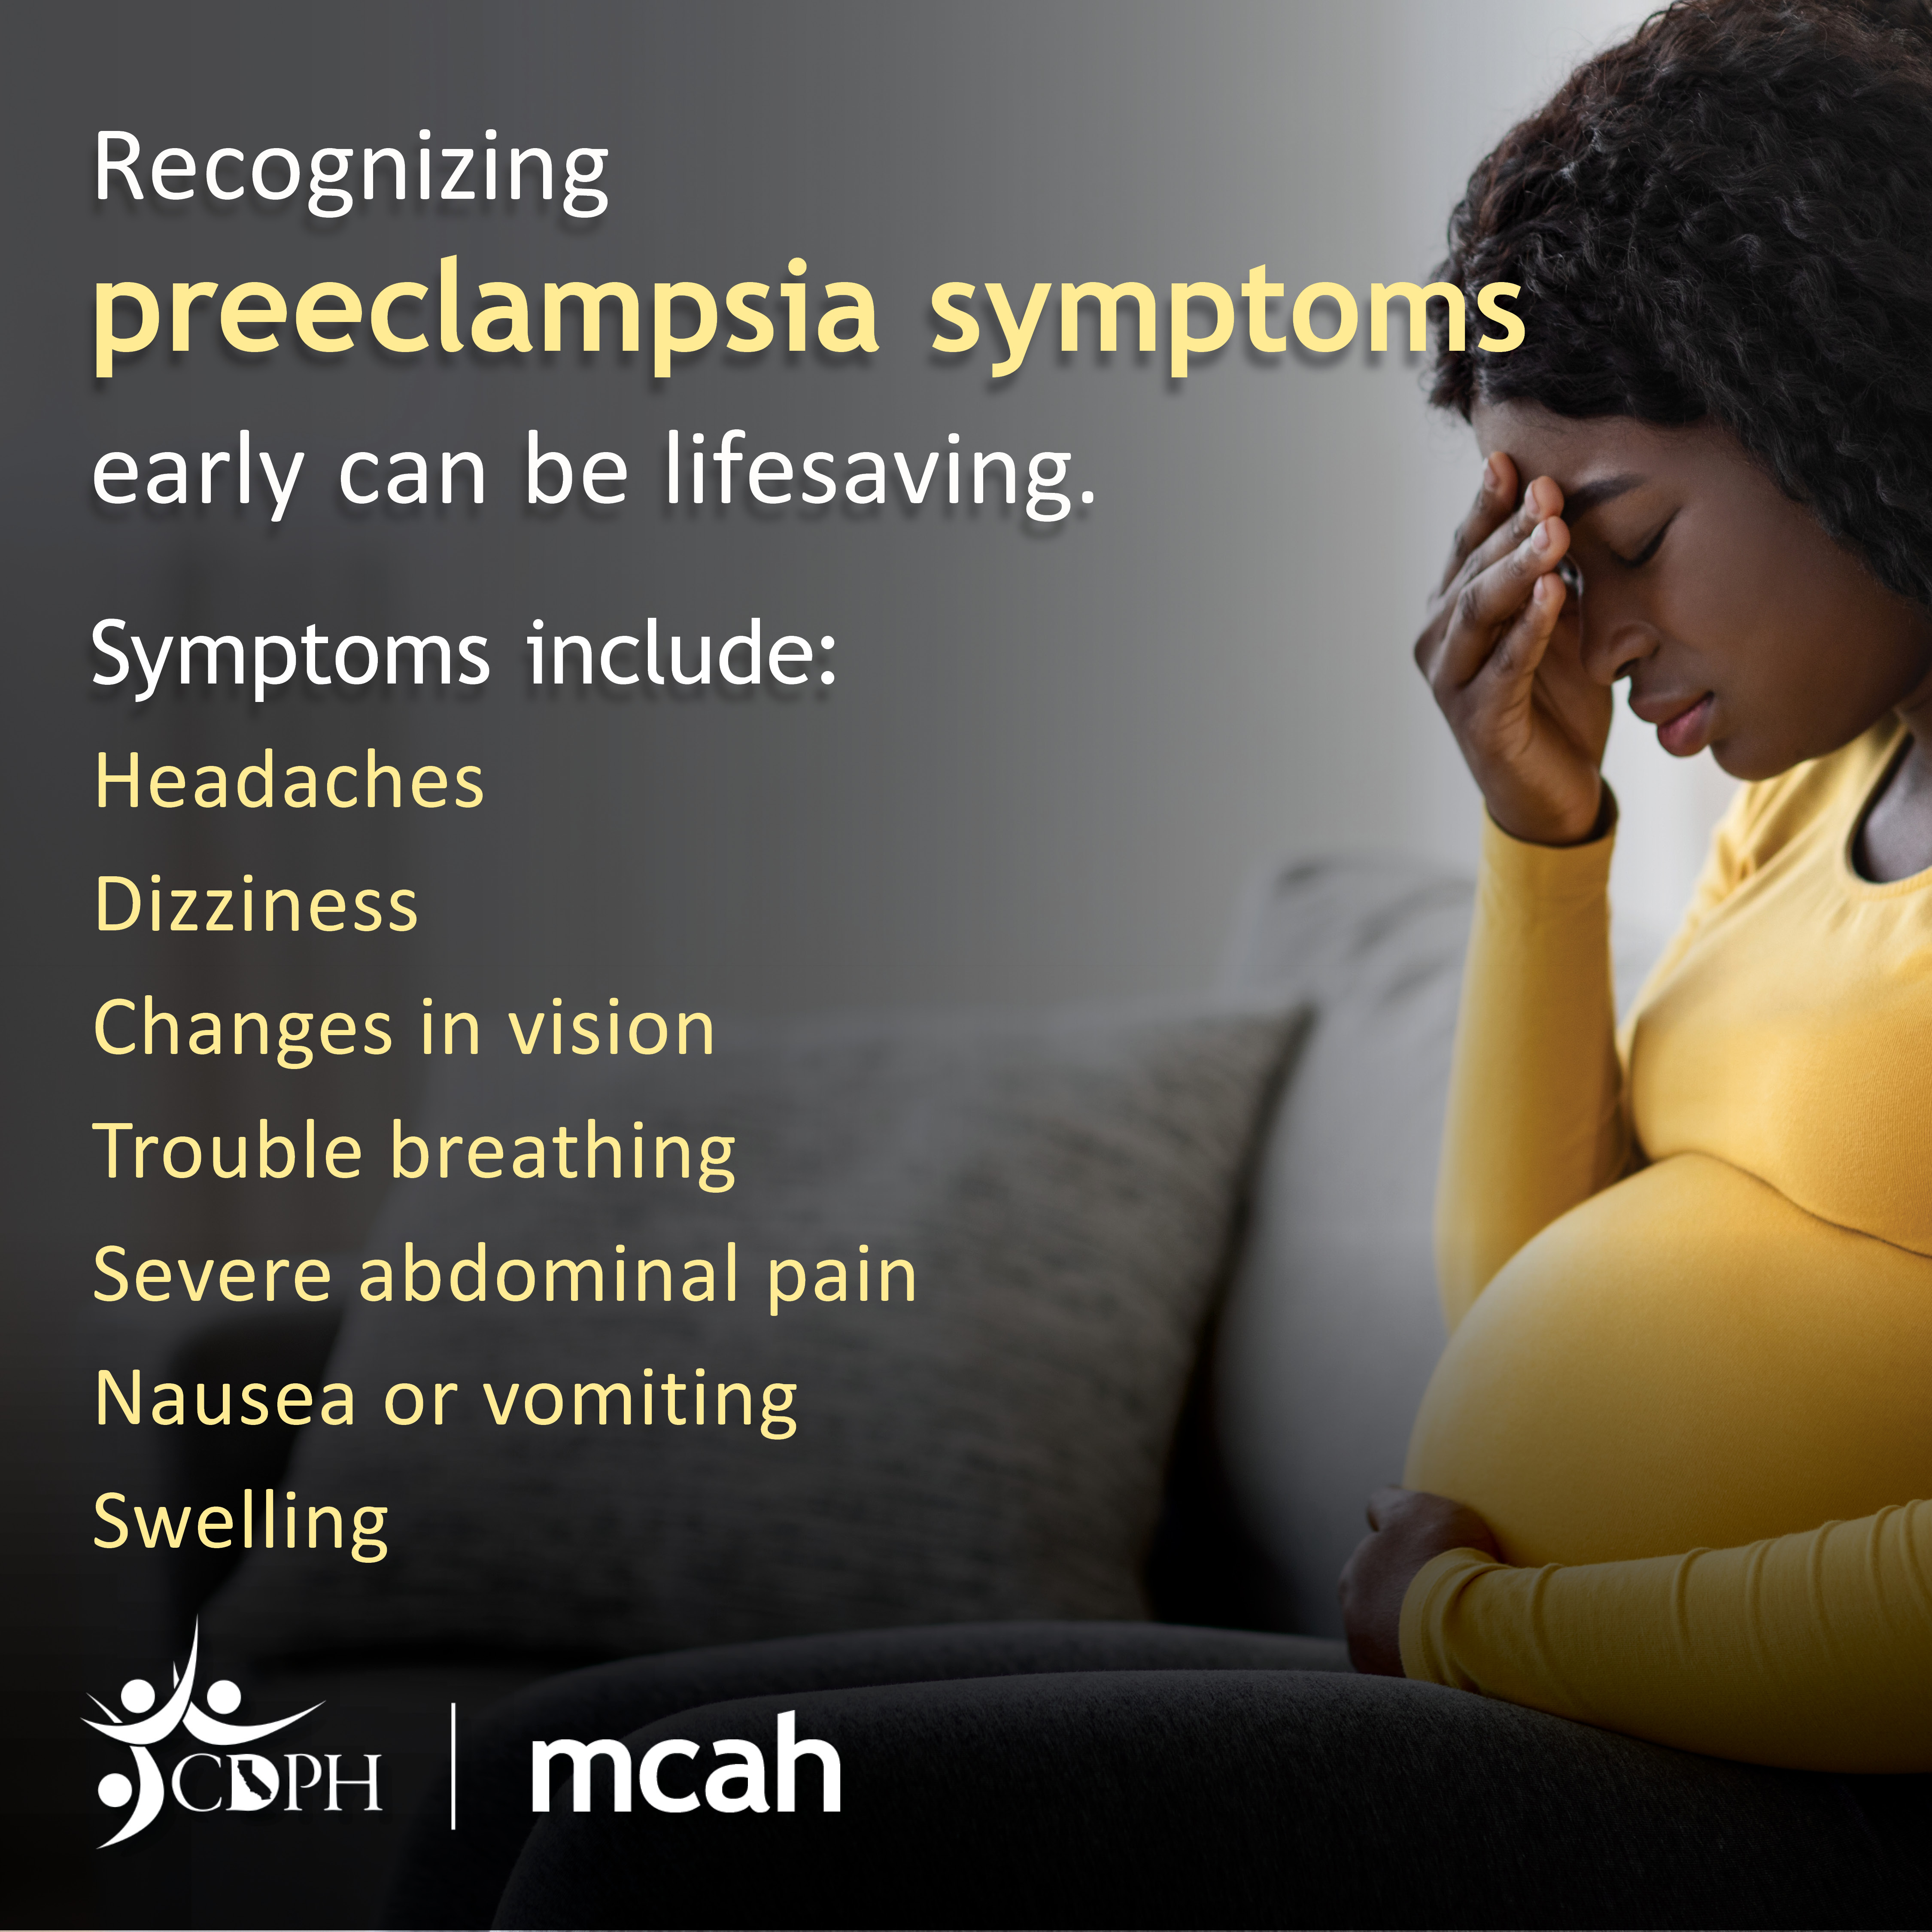 Caption 'Recognizing preeclampsia symptoms early can be livesaving.'